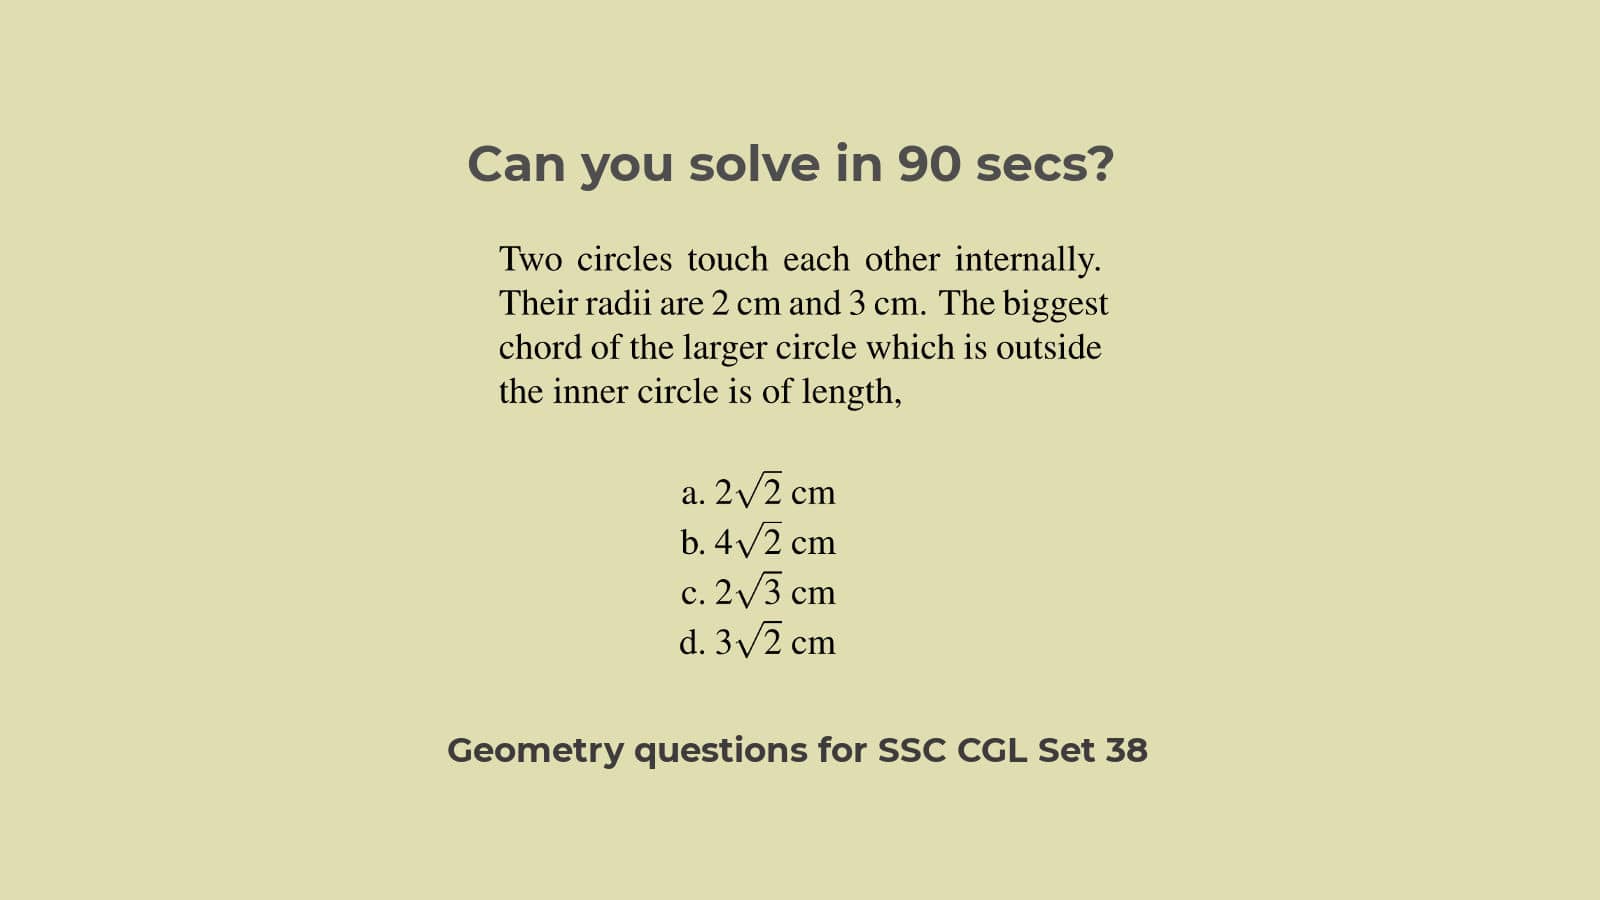 Geometry questions on circle triangle quadrilateral for SSC CGL Set 38